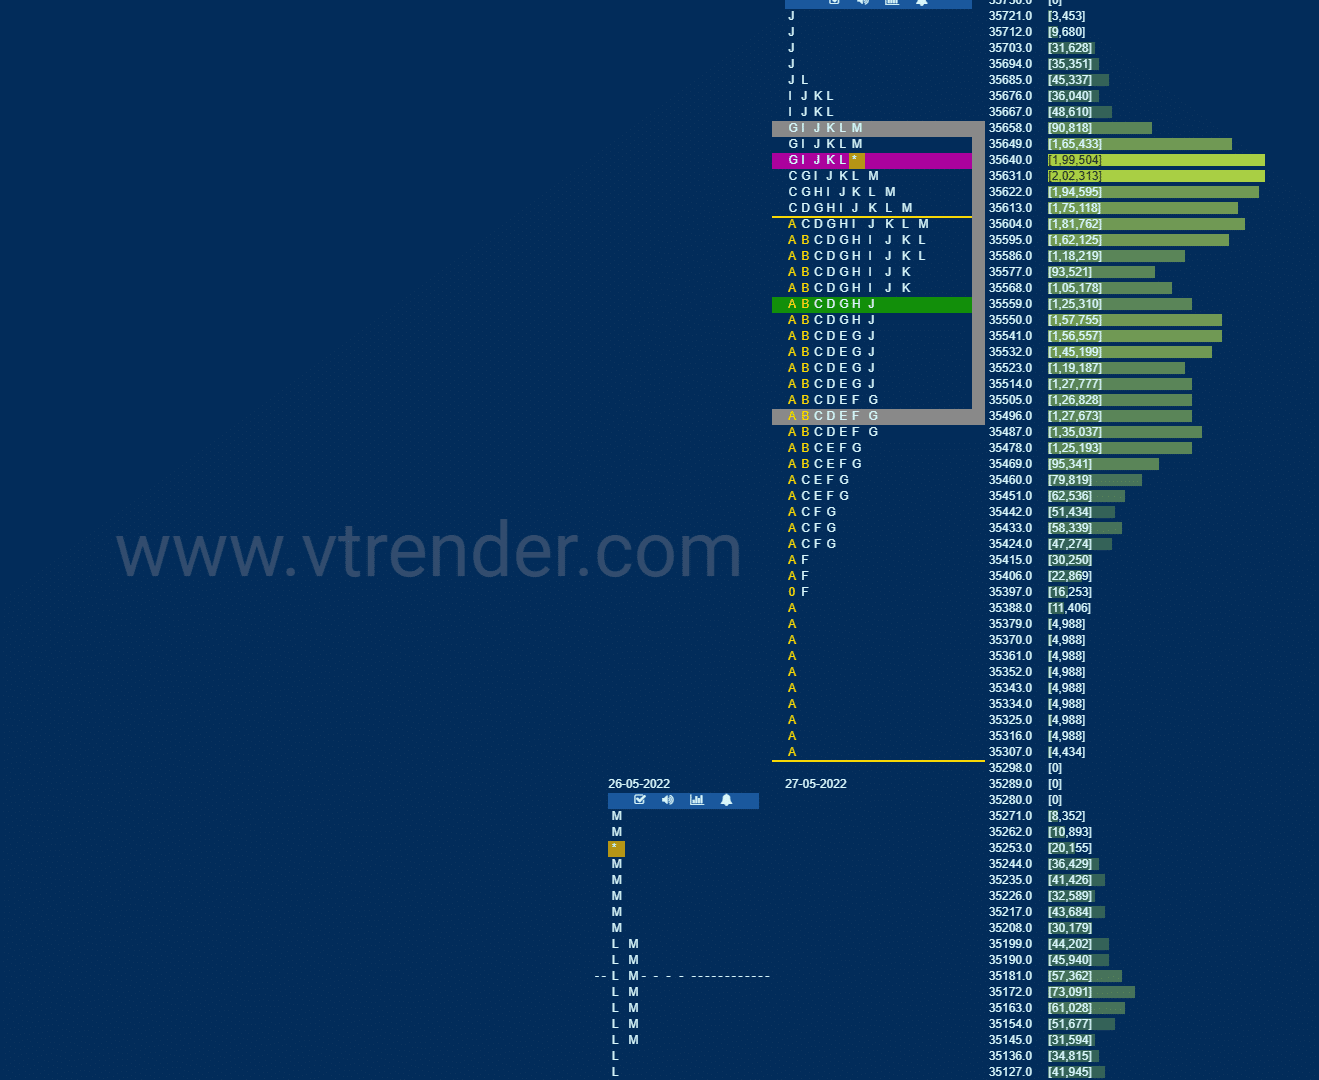 Bnf 19 Market Profile Analysis Dated 27Th May 2022 Banknifty Futures, Charts, Day Trading, Intraday Trading, Intraday Trading Strategies, Market Profile, Market Profile Trading Strategies, Nifty Futures, Order Flow Analysis, Support And Resistance, Technical Analysis, Trading Strategies, Volume Profile Trading